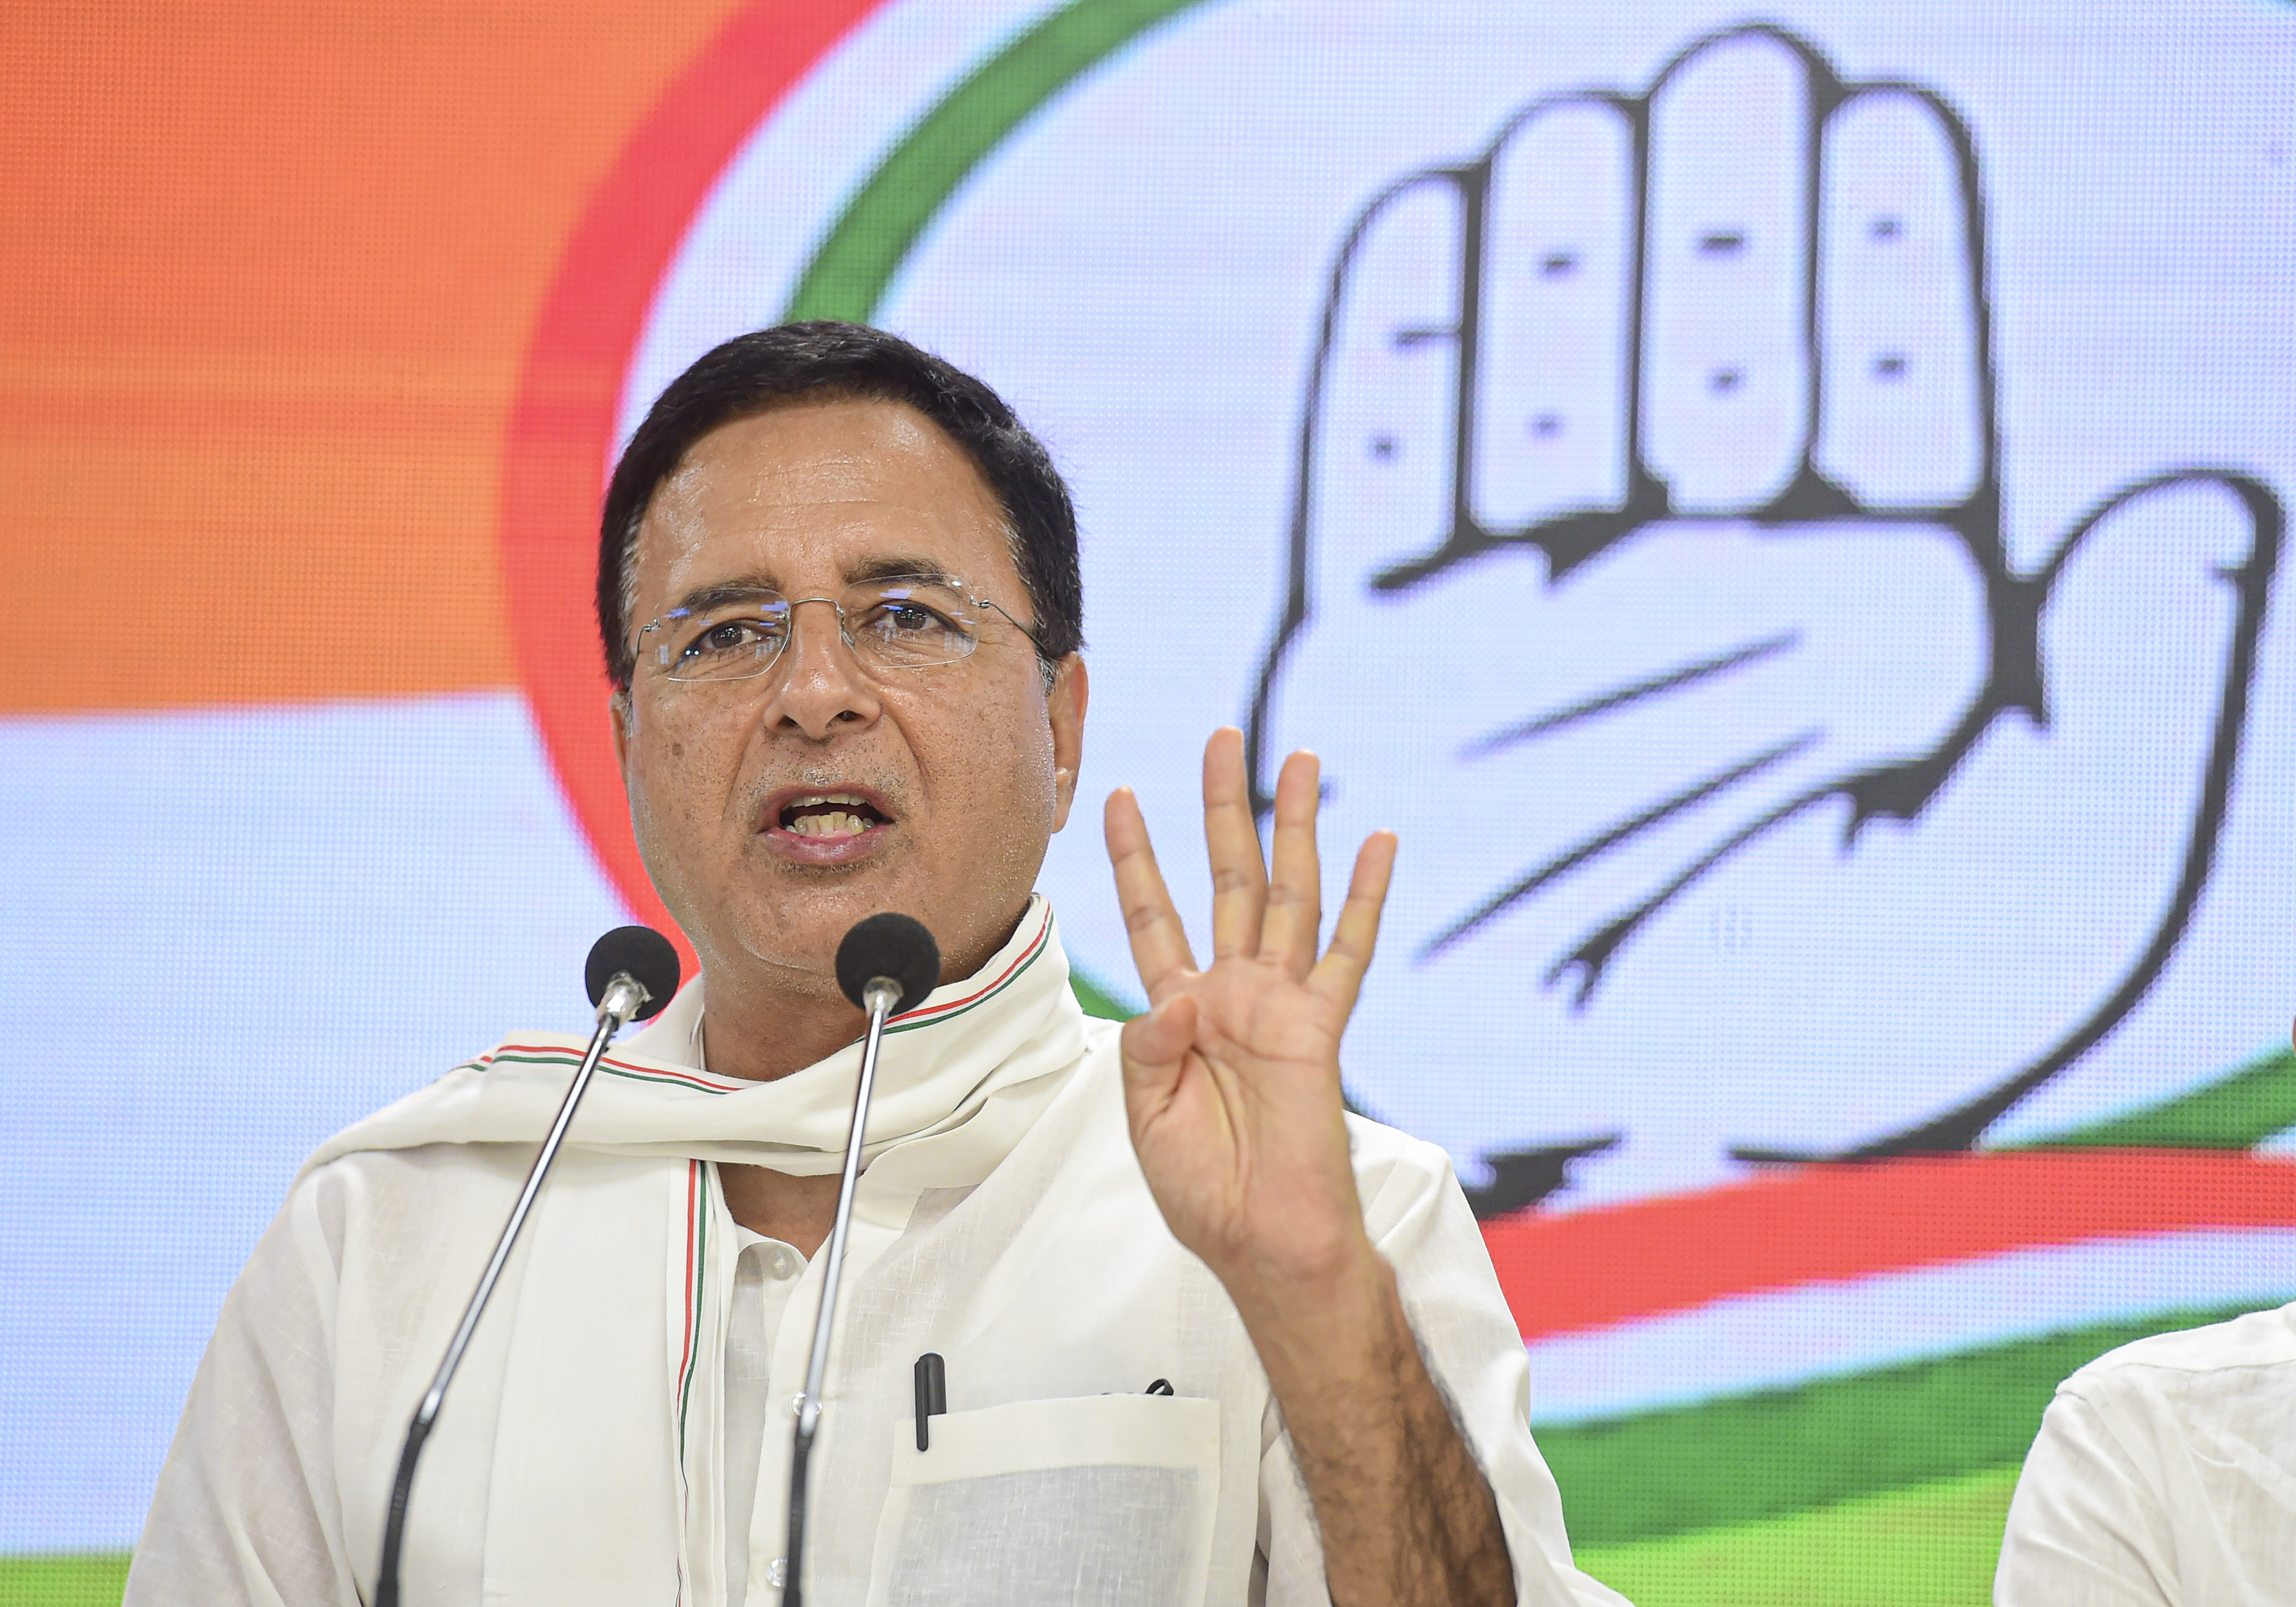 ‘How long will jumle-baazi continue’: Congress on announcement of recruitment of 10 lakh people by government